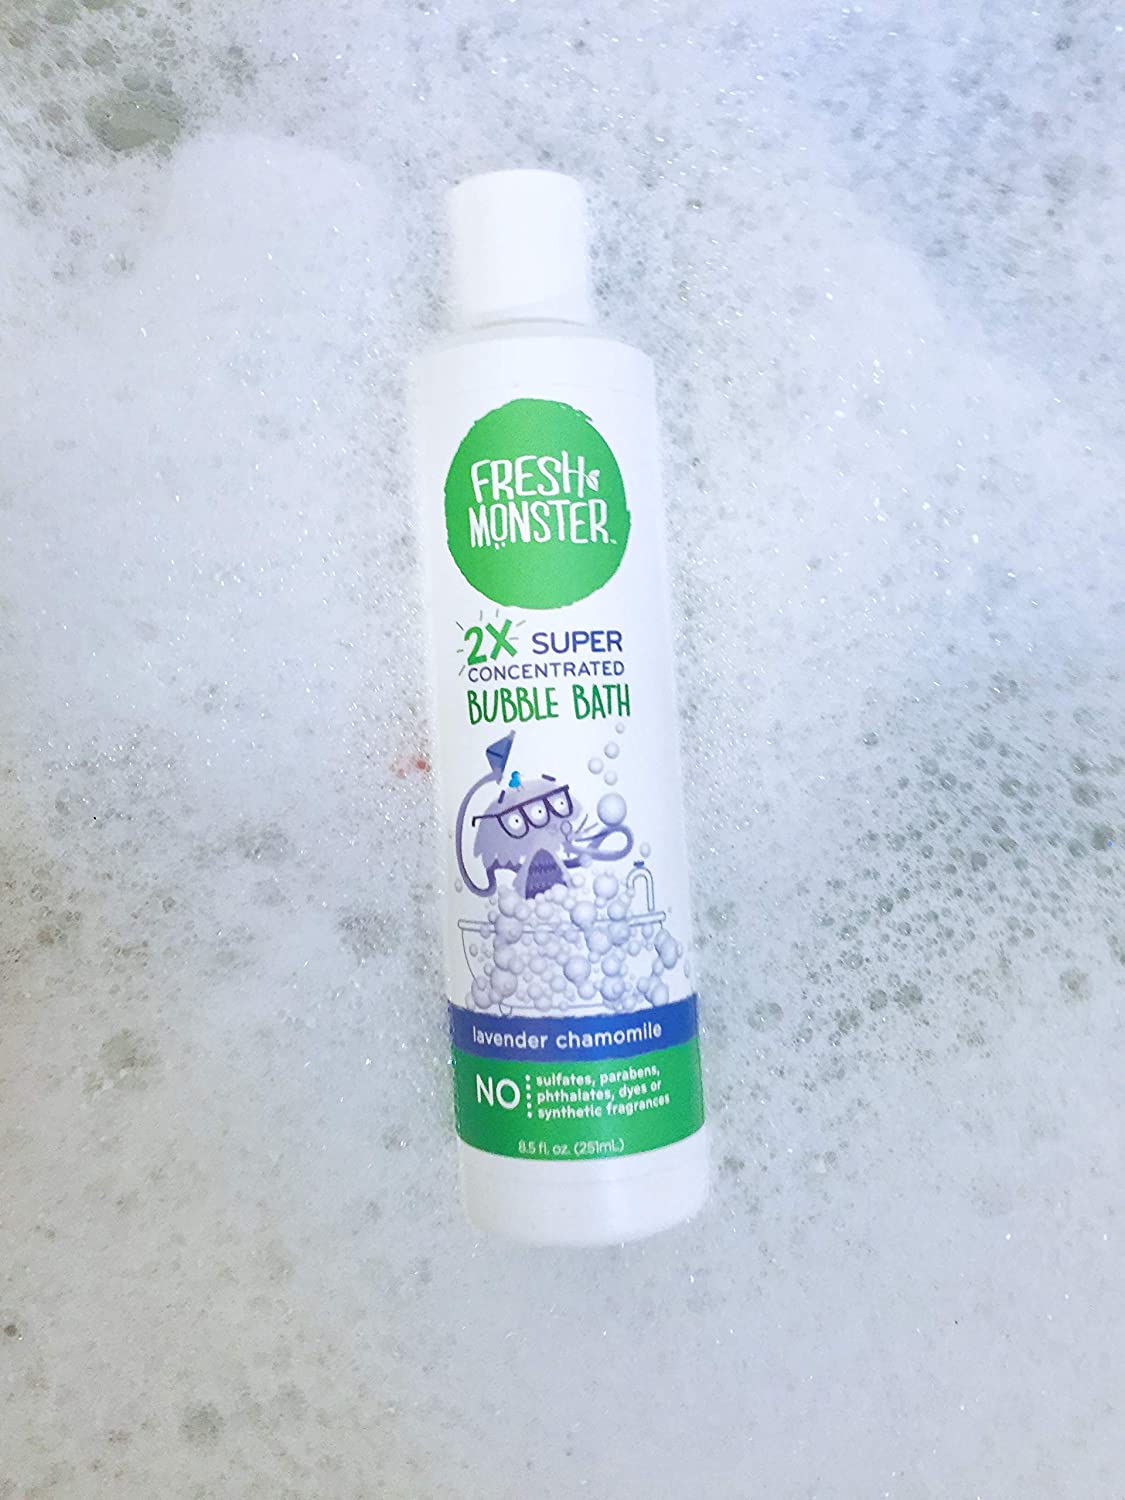 Fresh Monster 2X Super Concentrated Bubble Bath